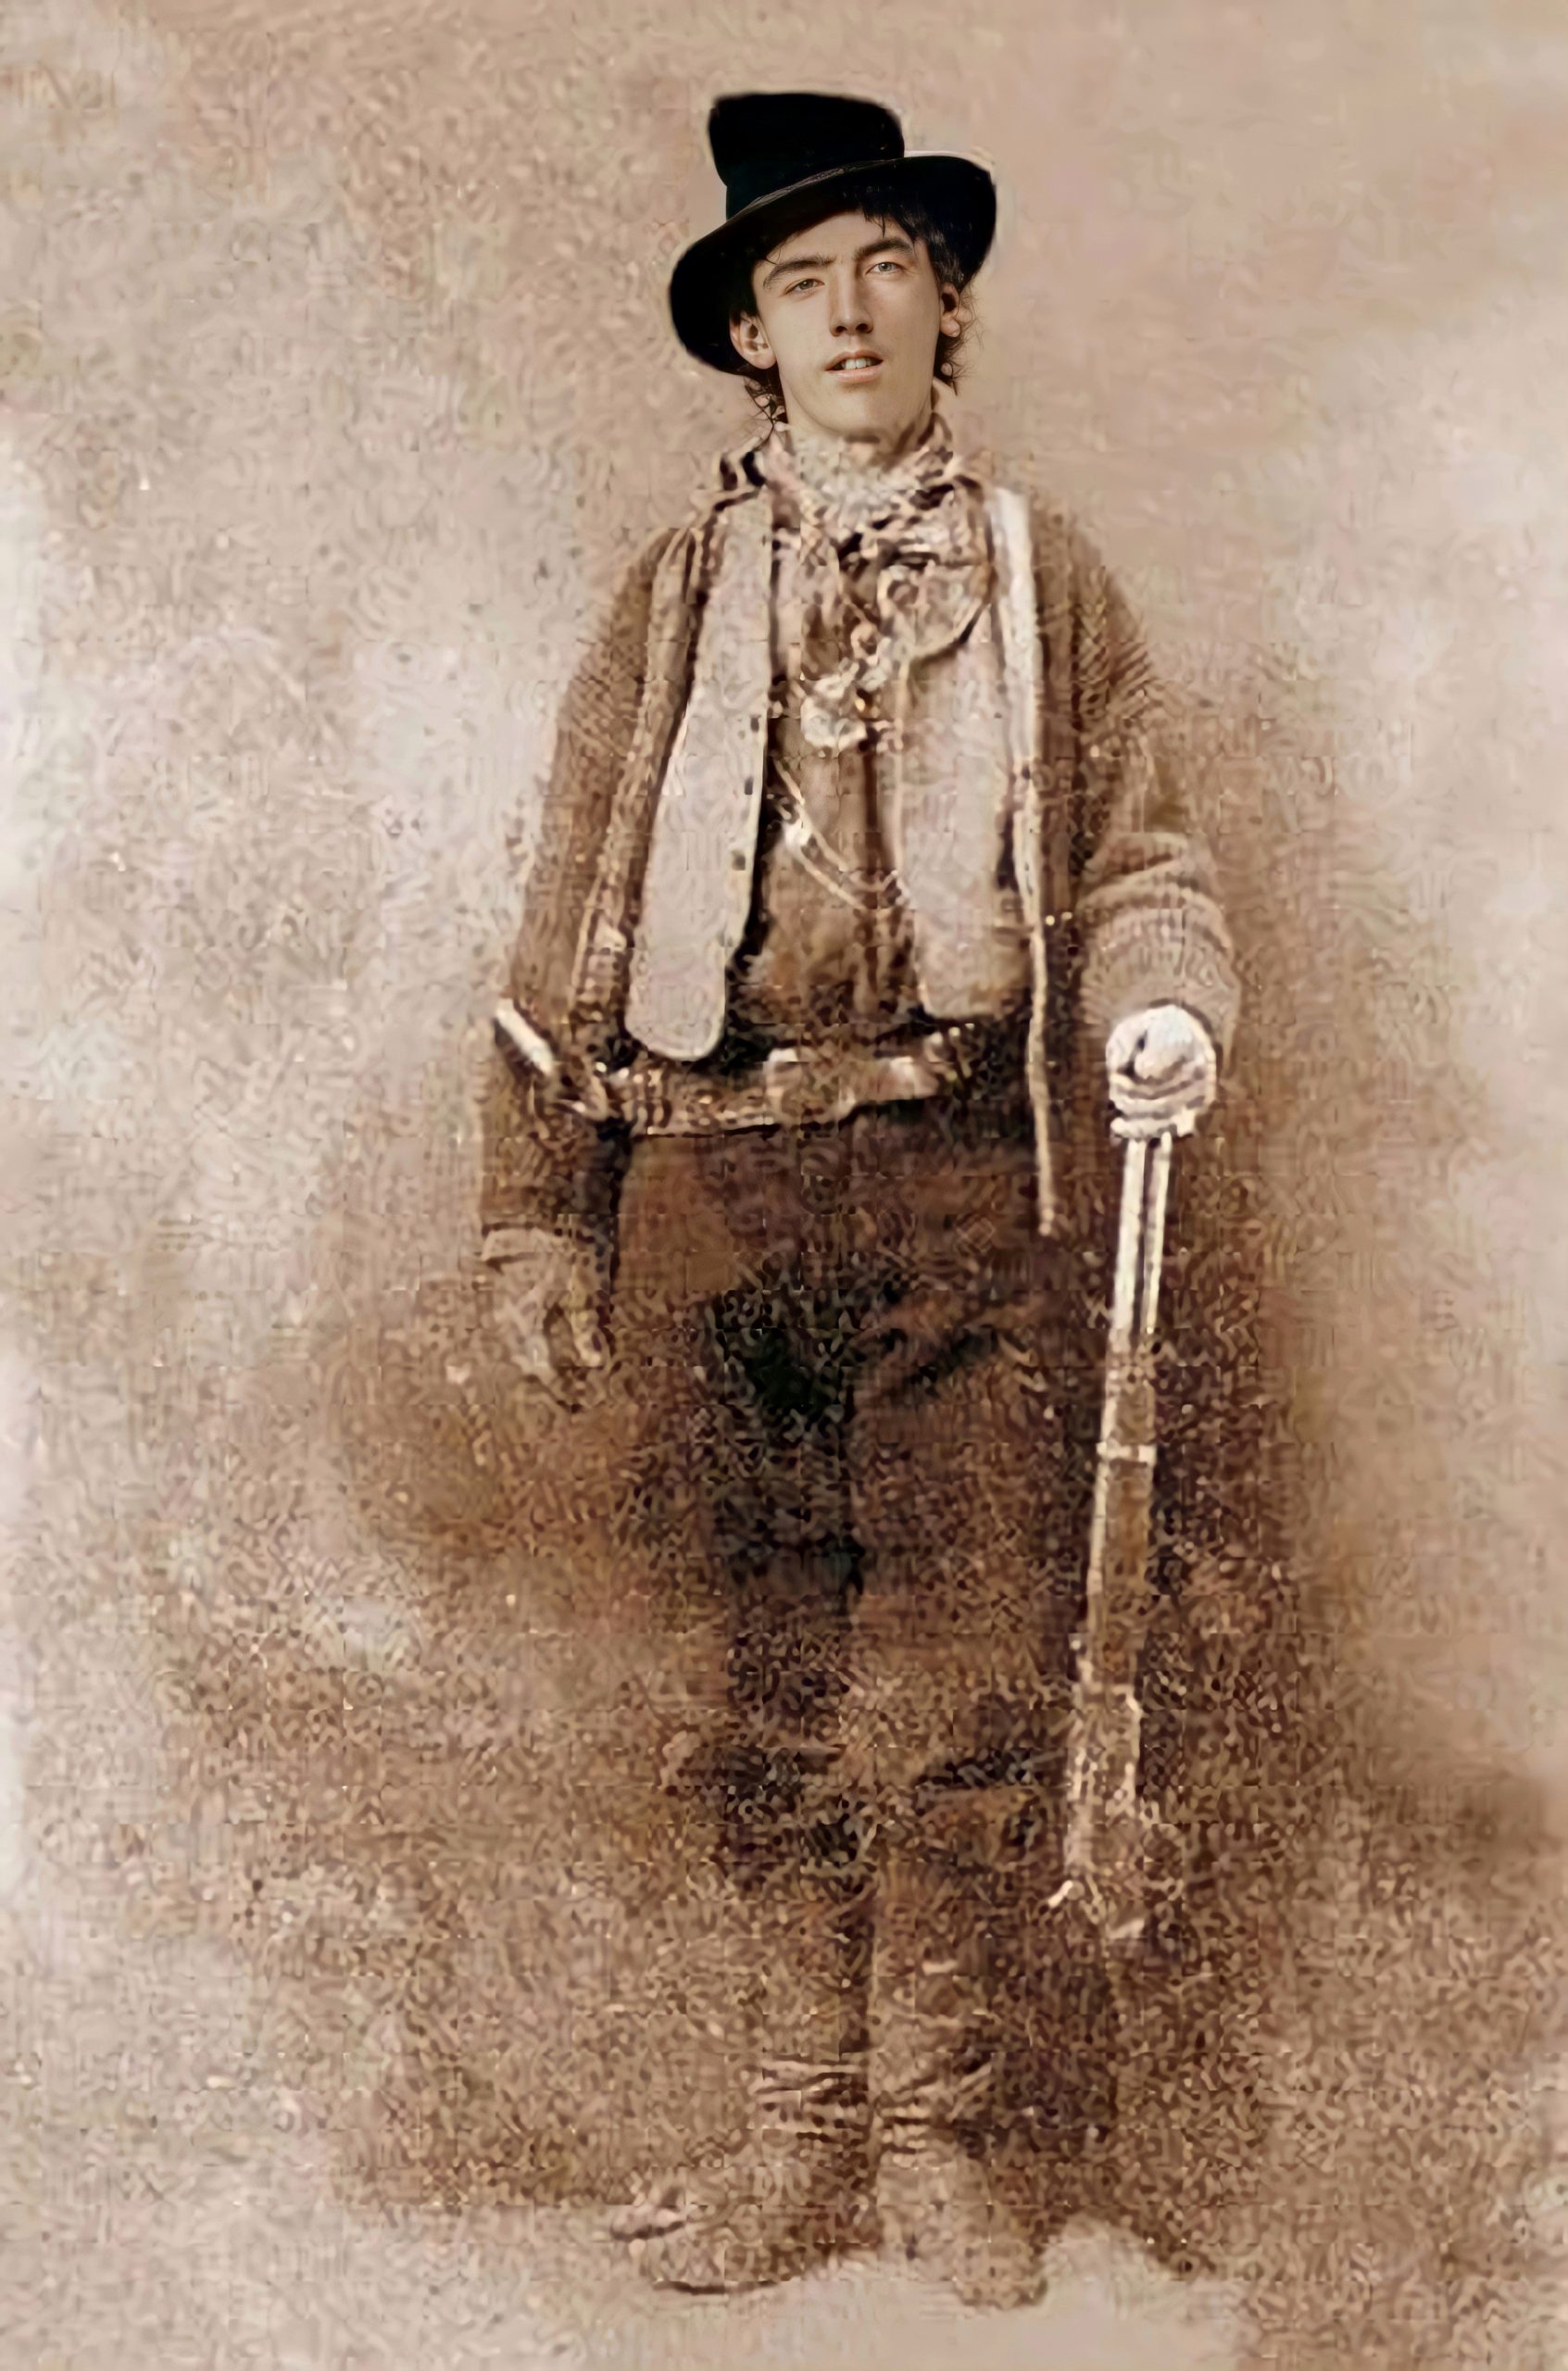 Billy the Kid: Disillusioned Teenager or a Man with a Plan - History